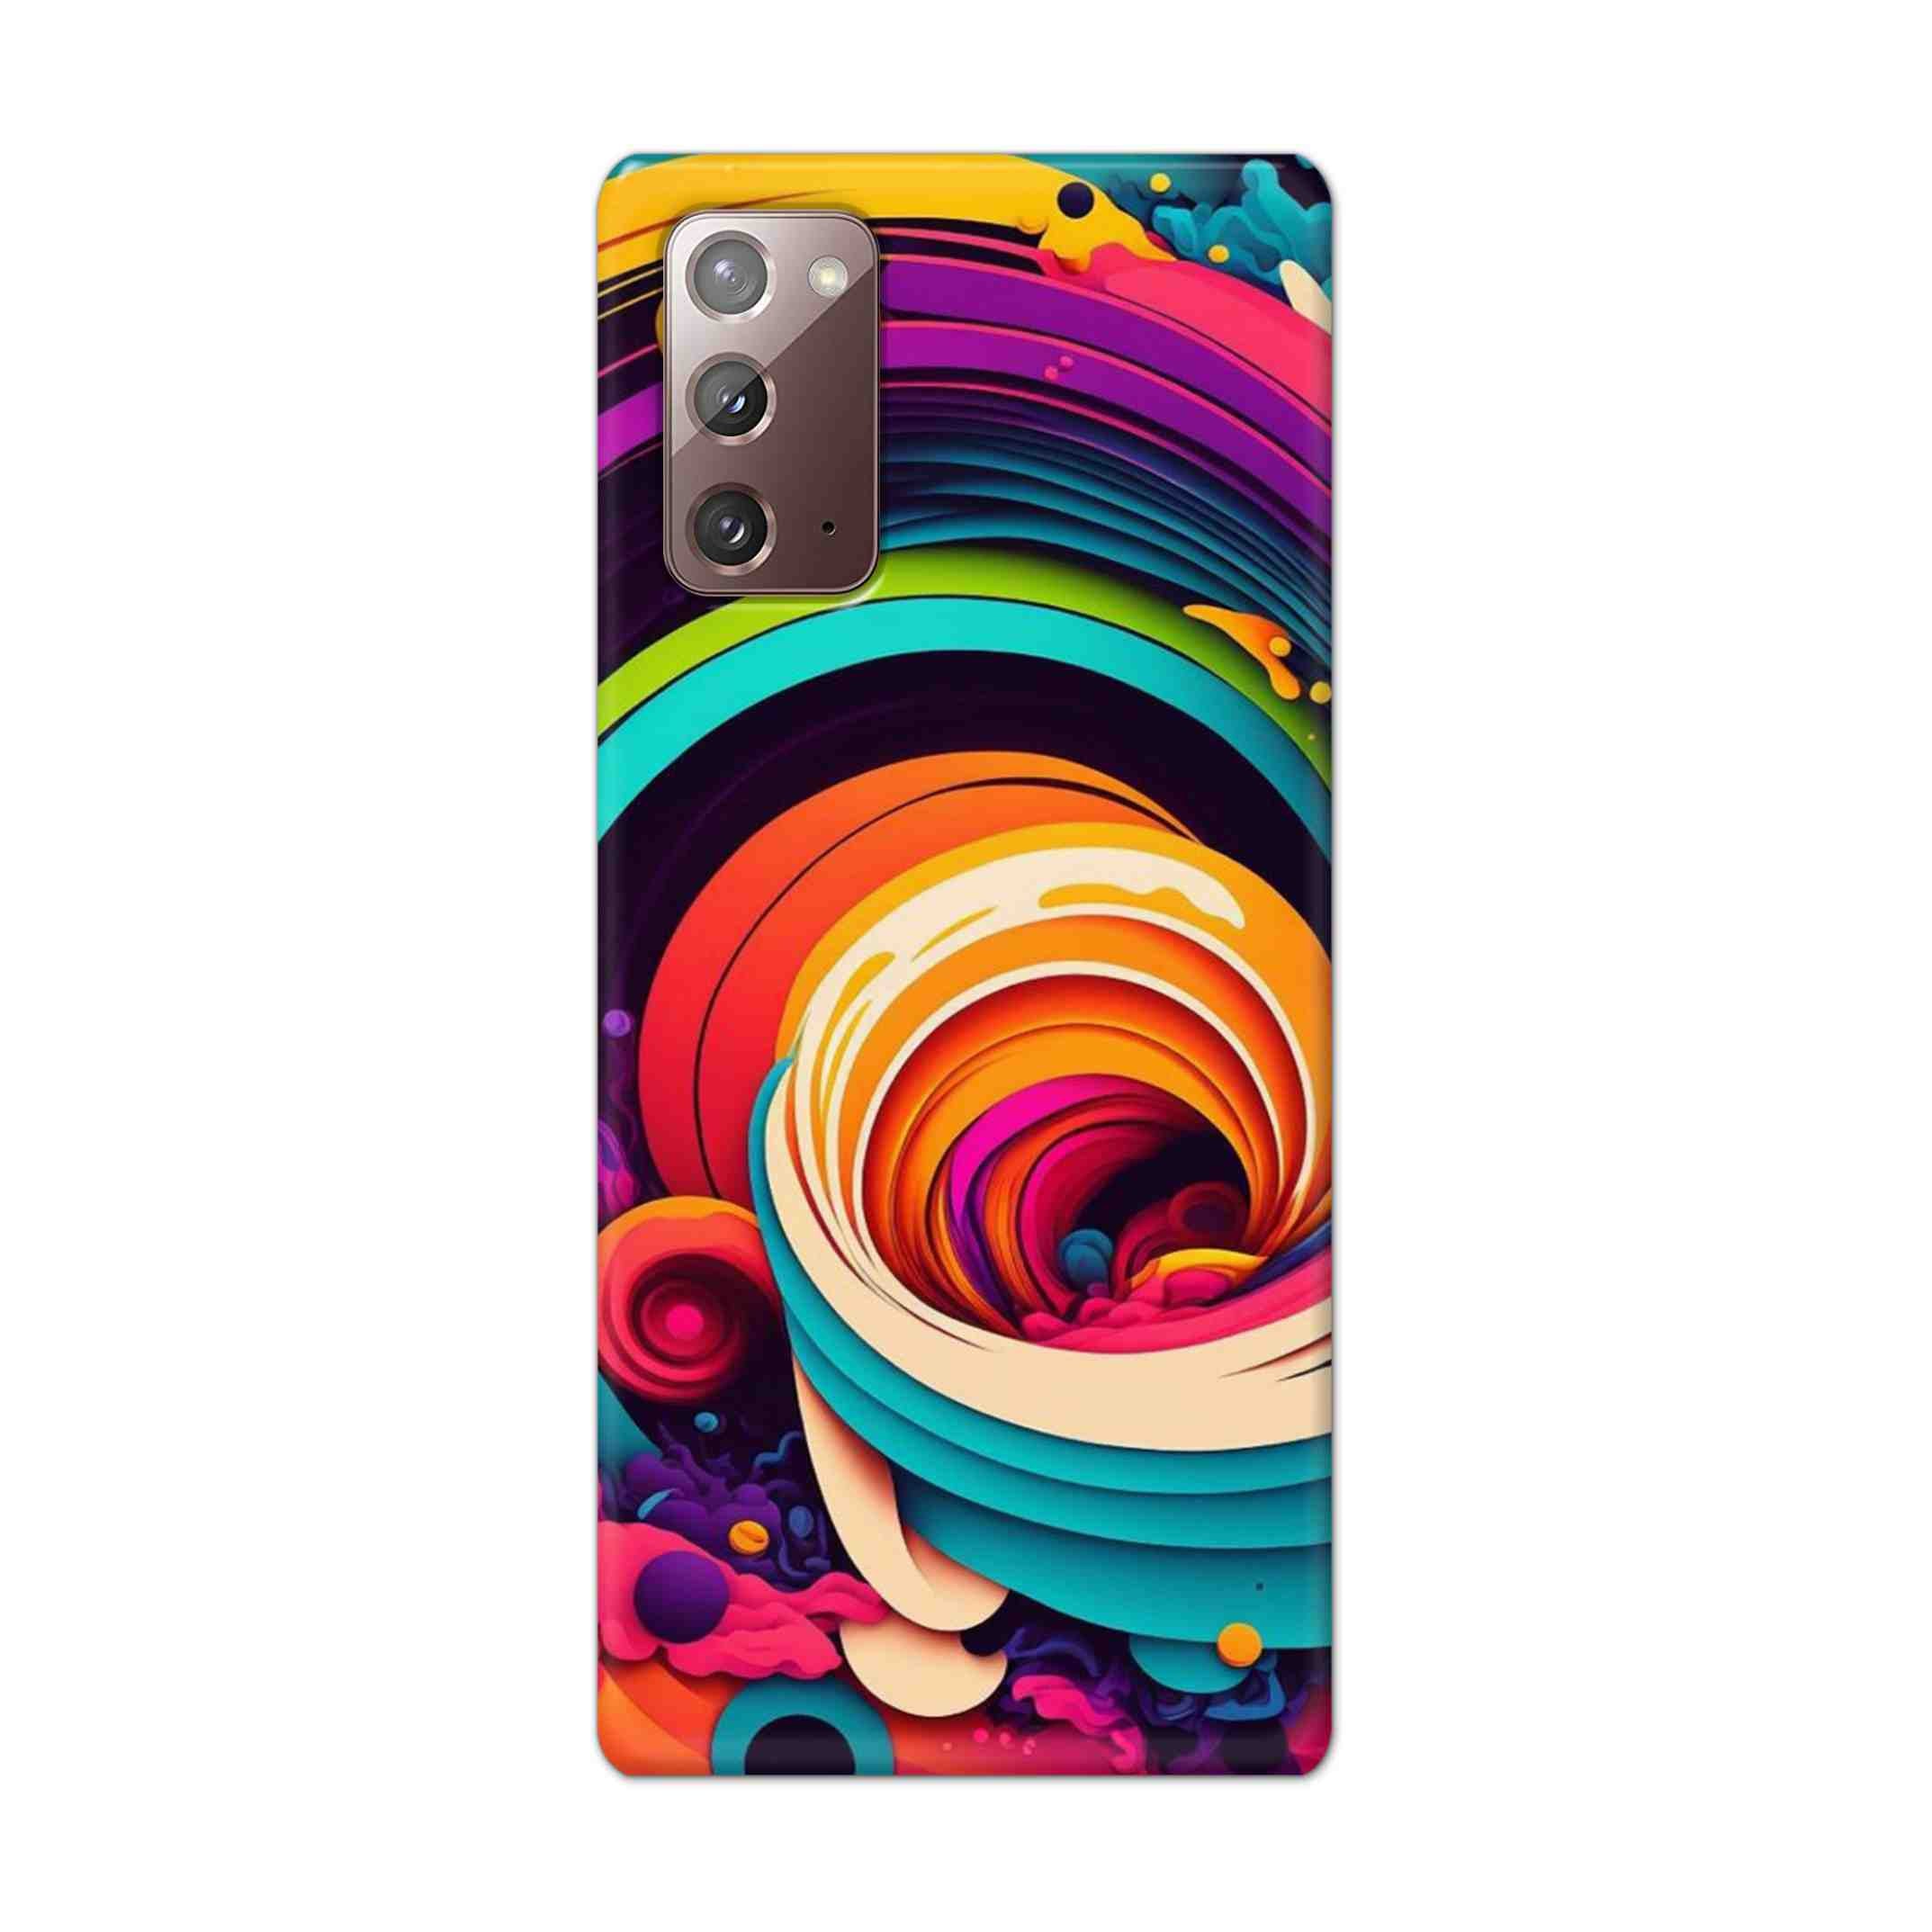 Buy Colour Circle Hard Back Mobile Phone Case Cover For Samsung Galaxy Note 20 Online